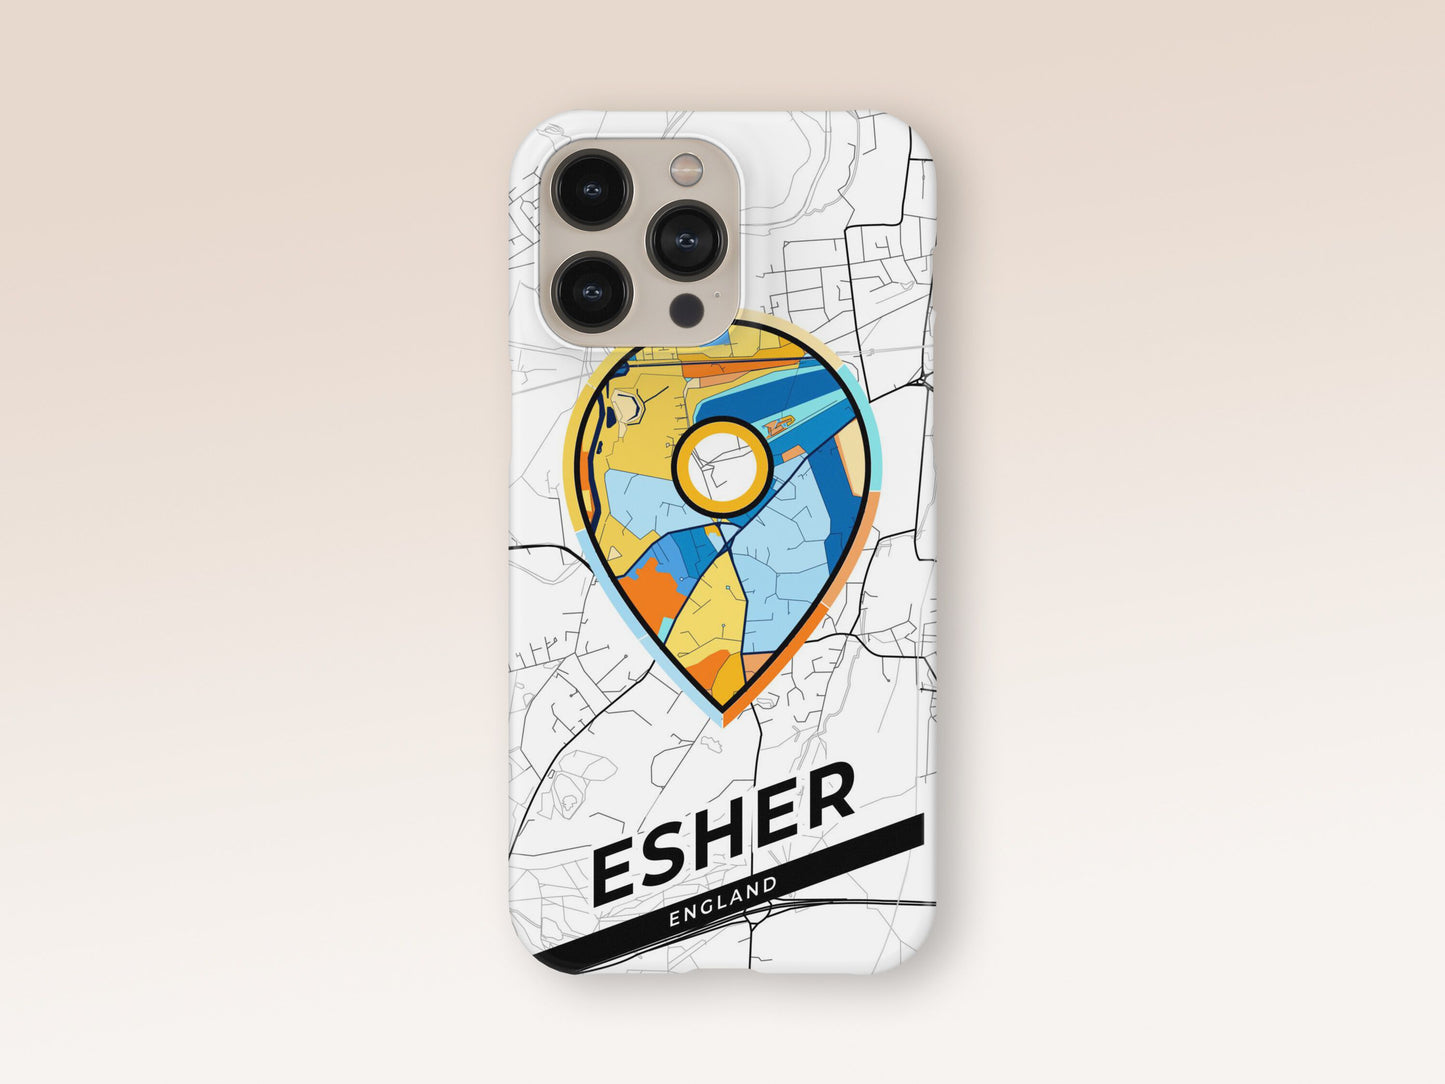 Esher England slim phone case with colorful icon. Birthday, wedding or housewarming gift. Couple match cases. 1